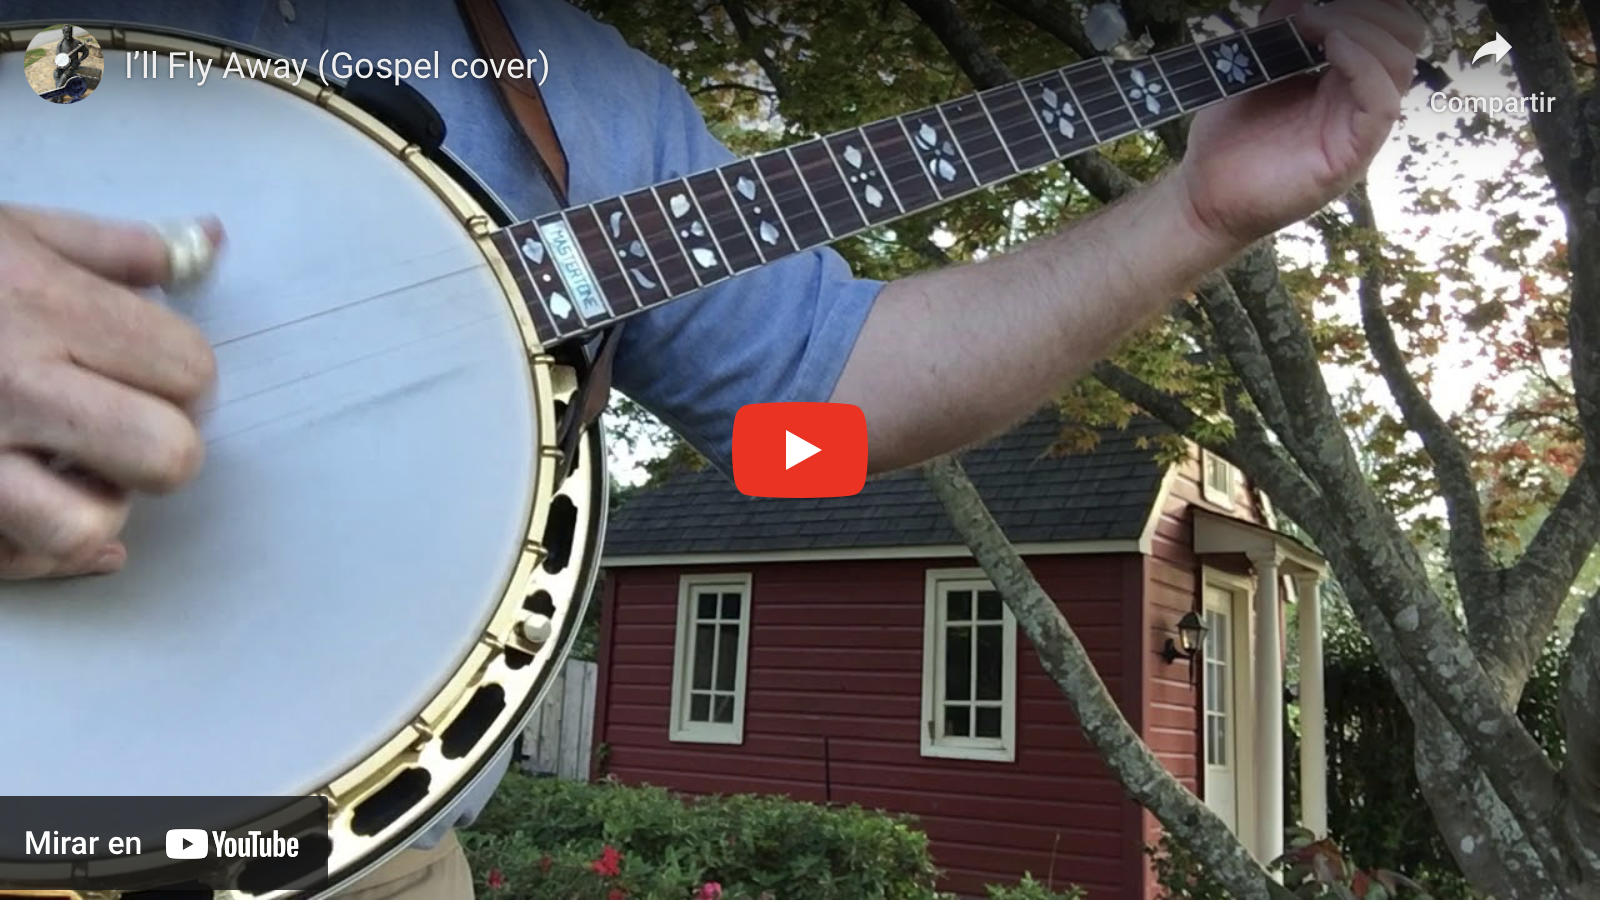 Listen to the song “I’ll Fly Away” on banjo